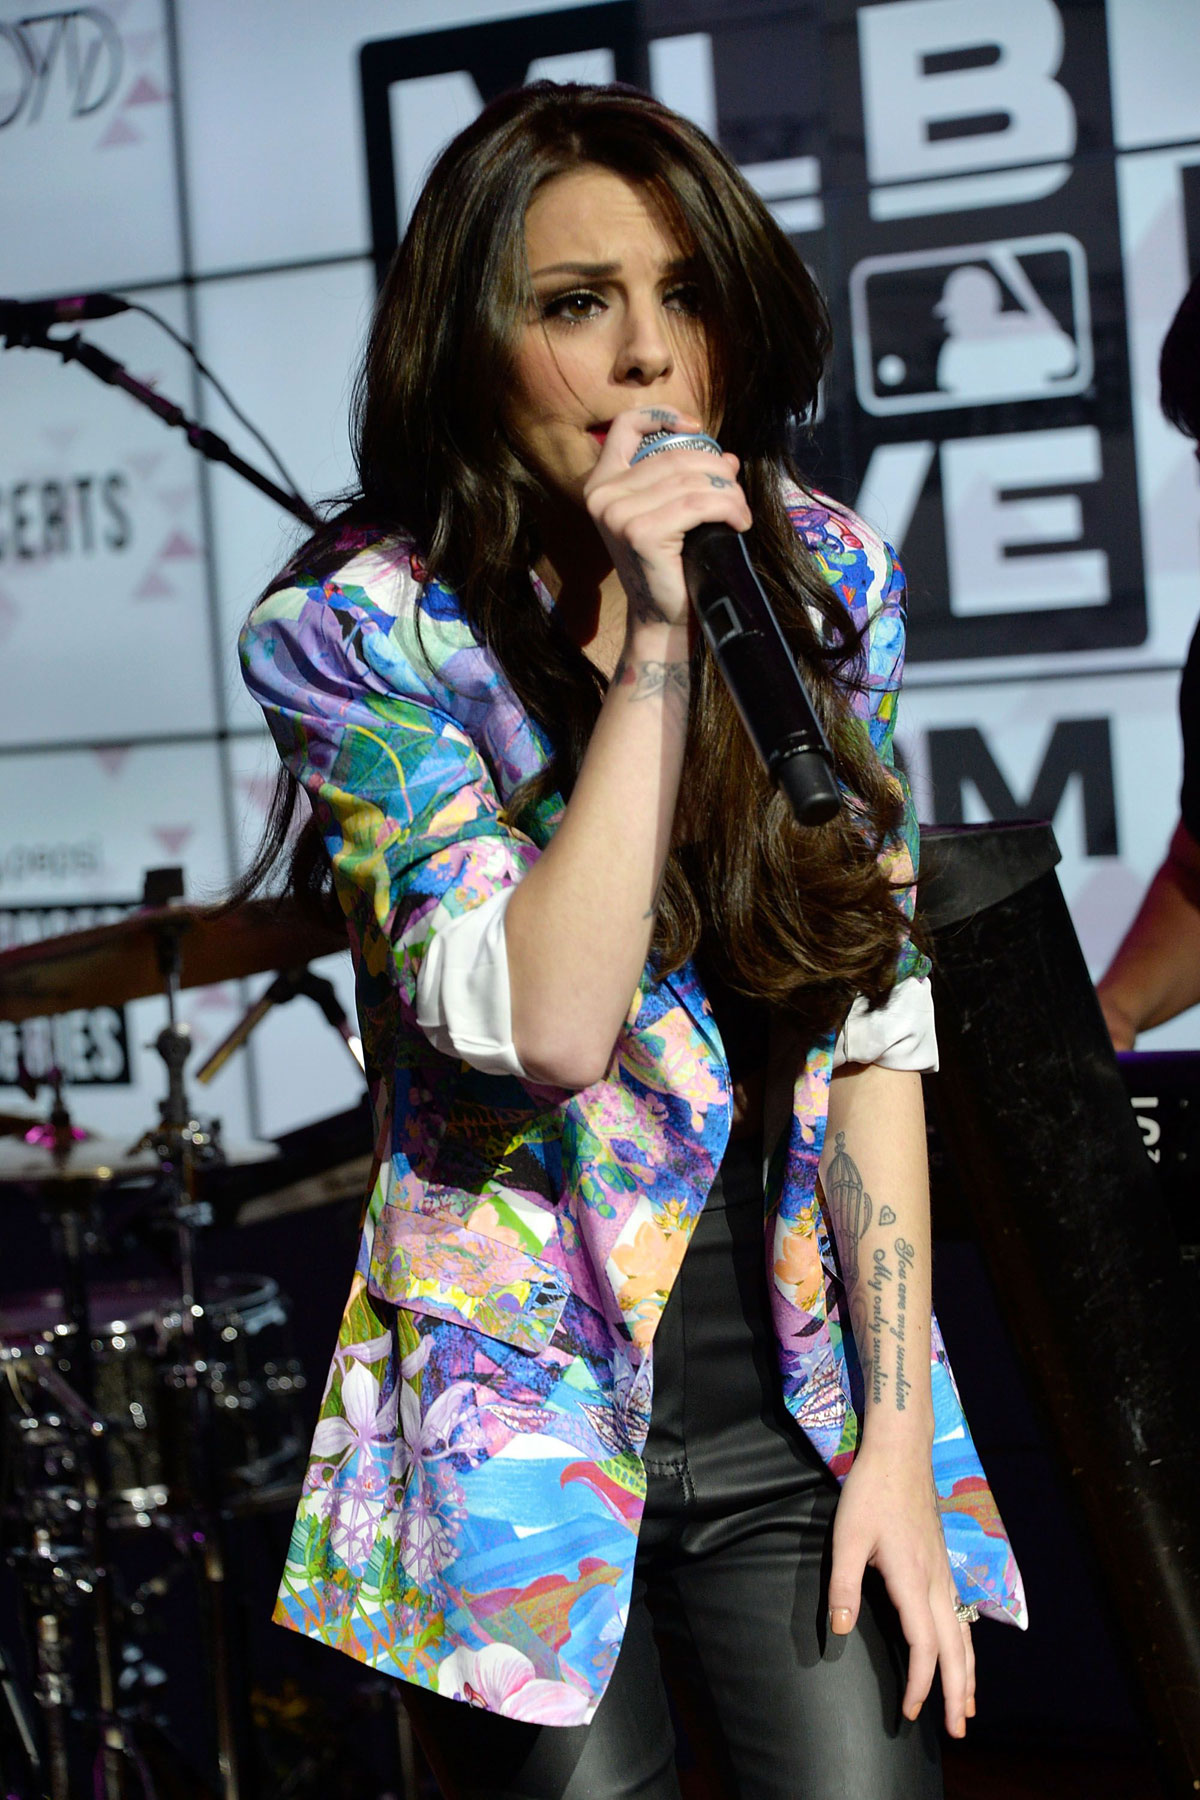 Cher Lloyd performs at MLB Fan Cave